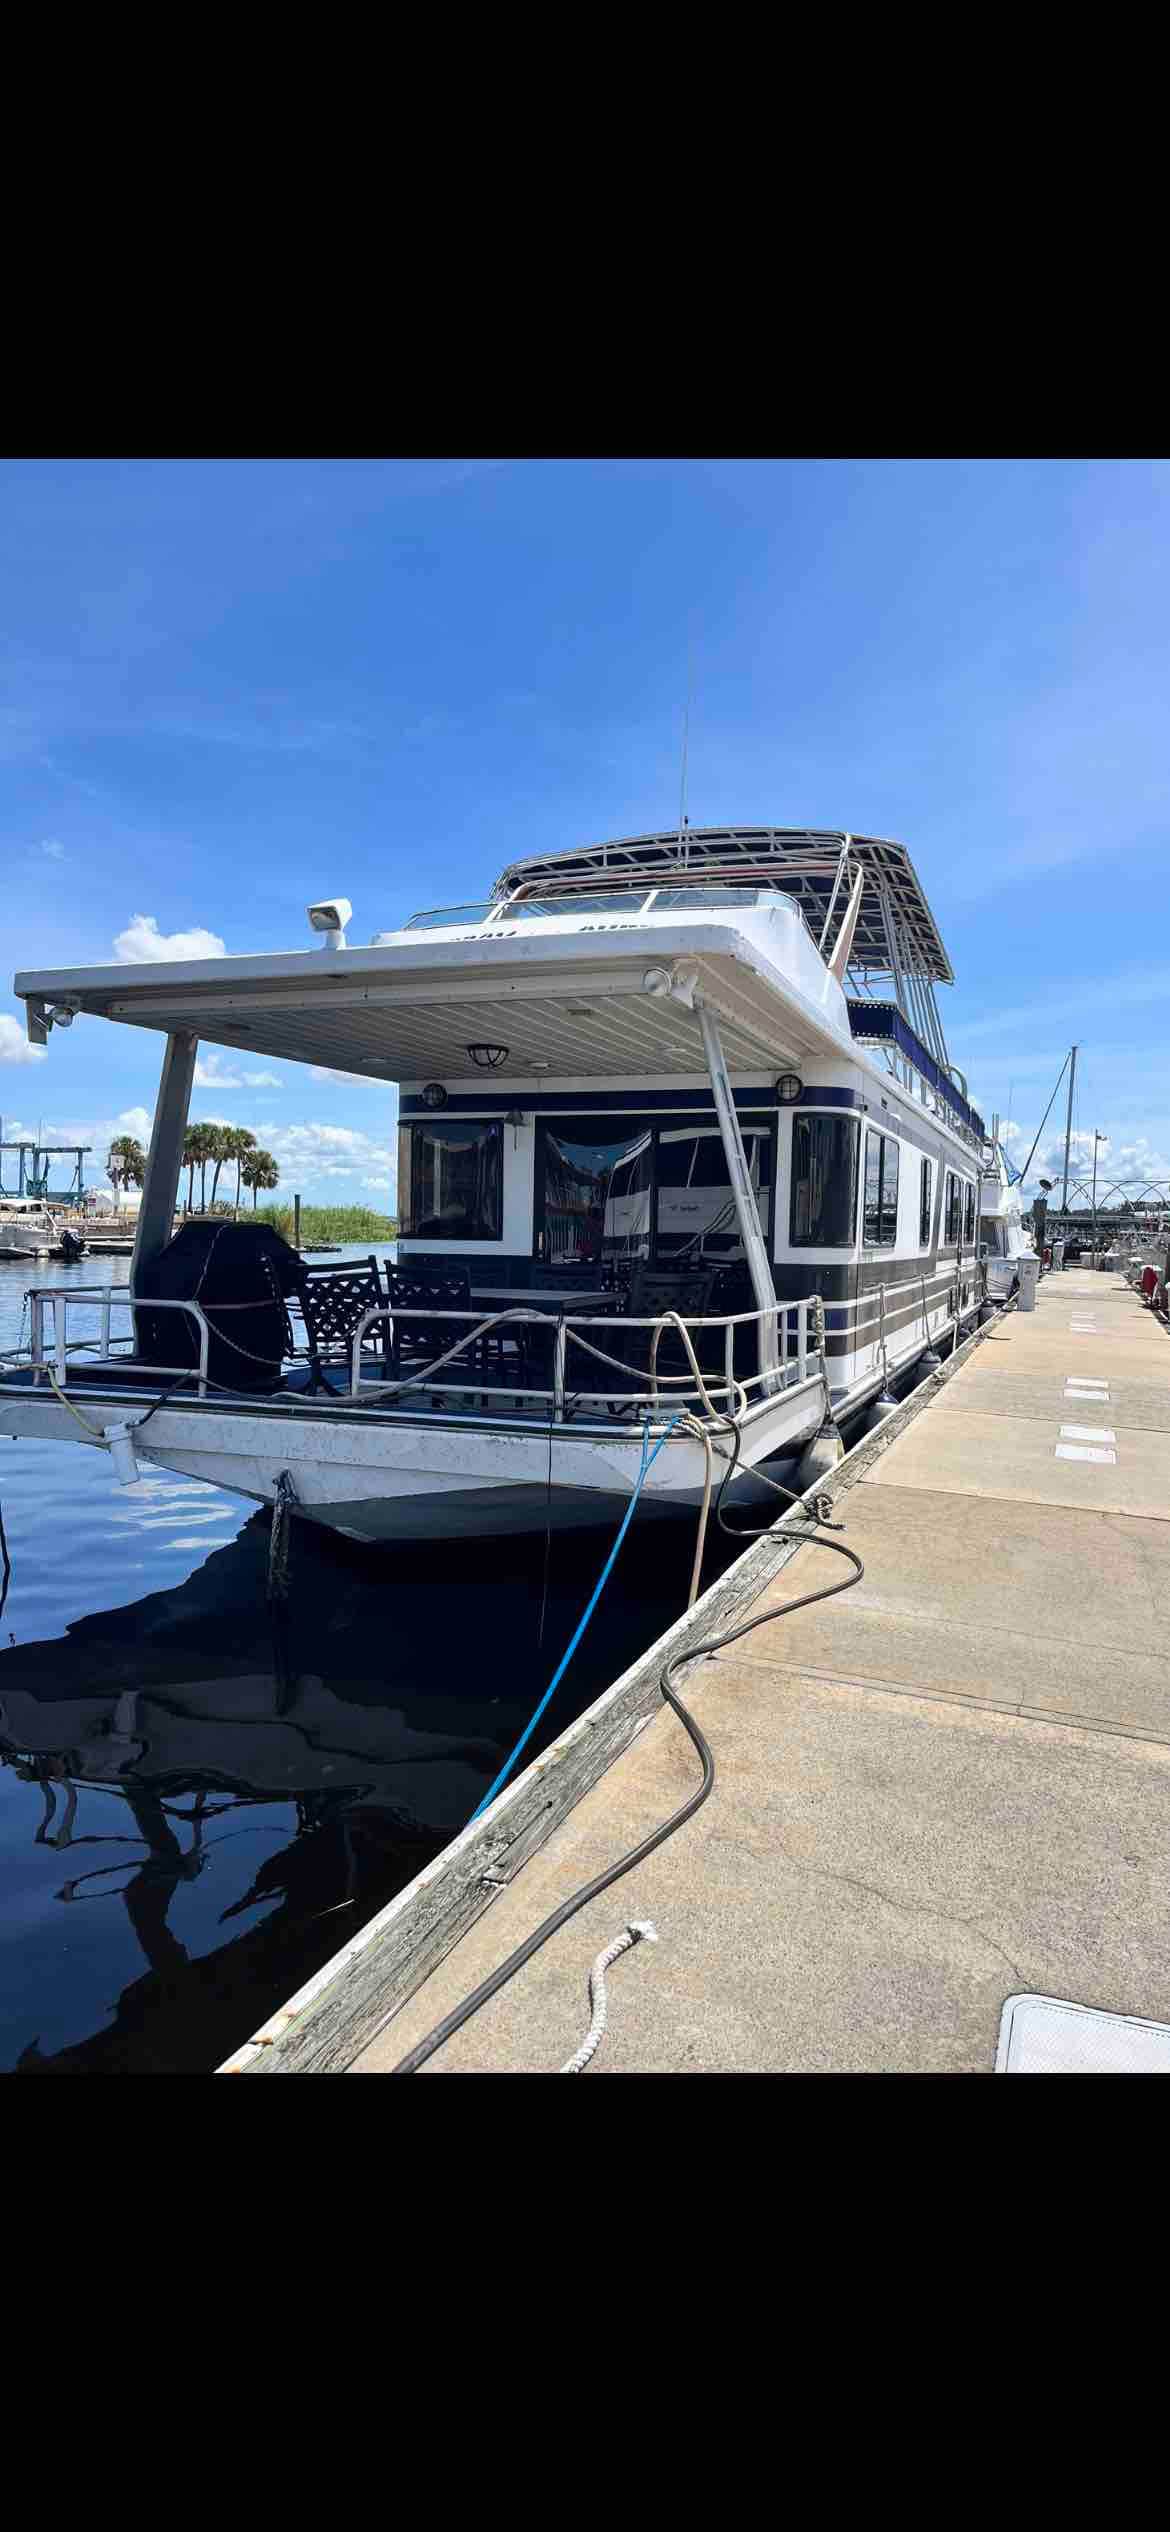 The Prom Queen Houseboat